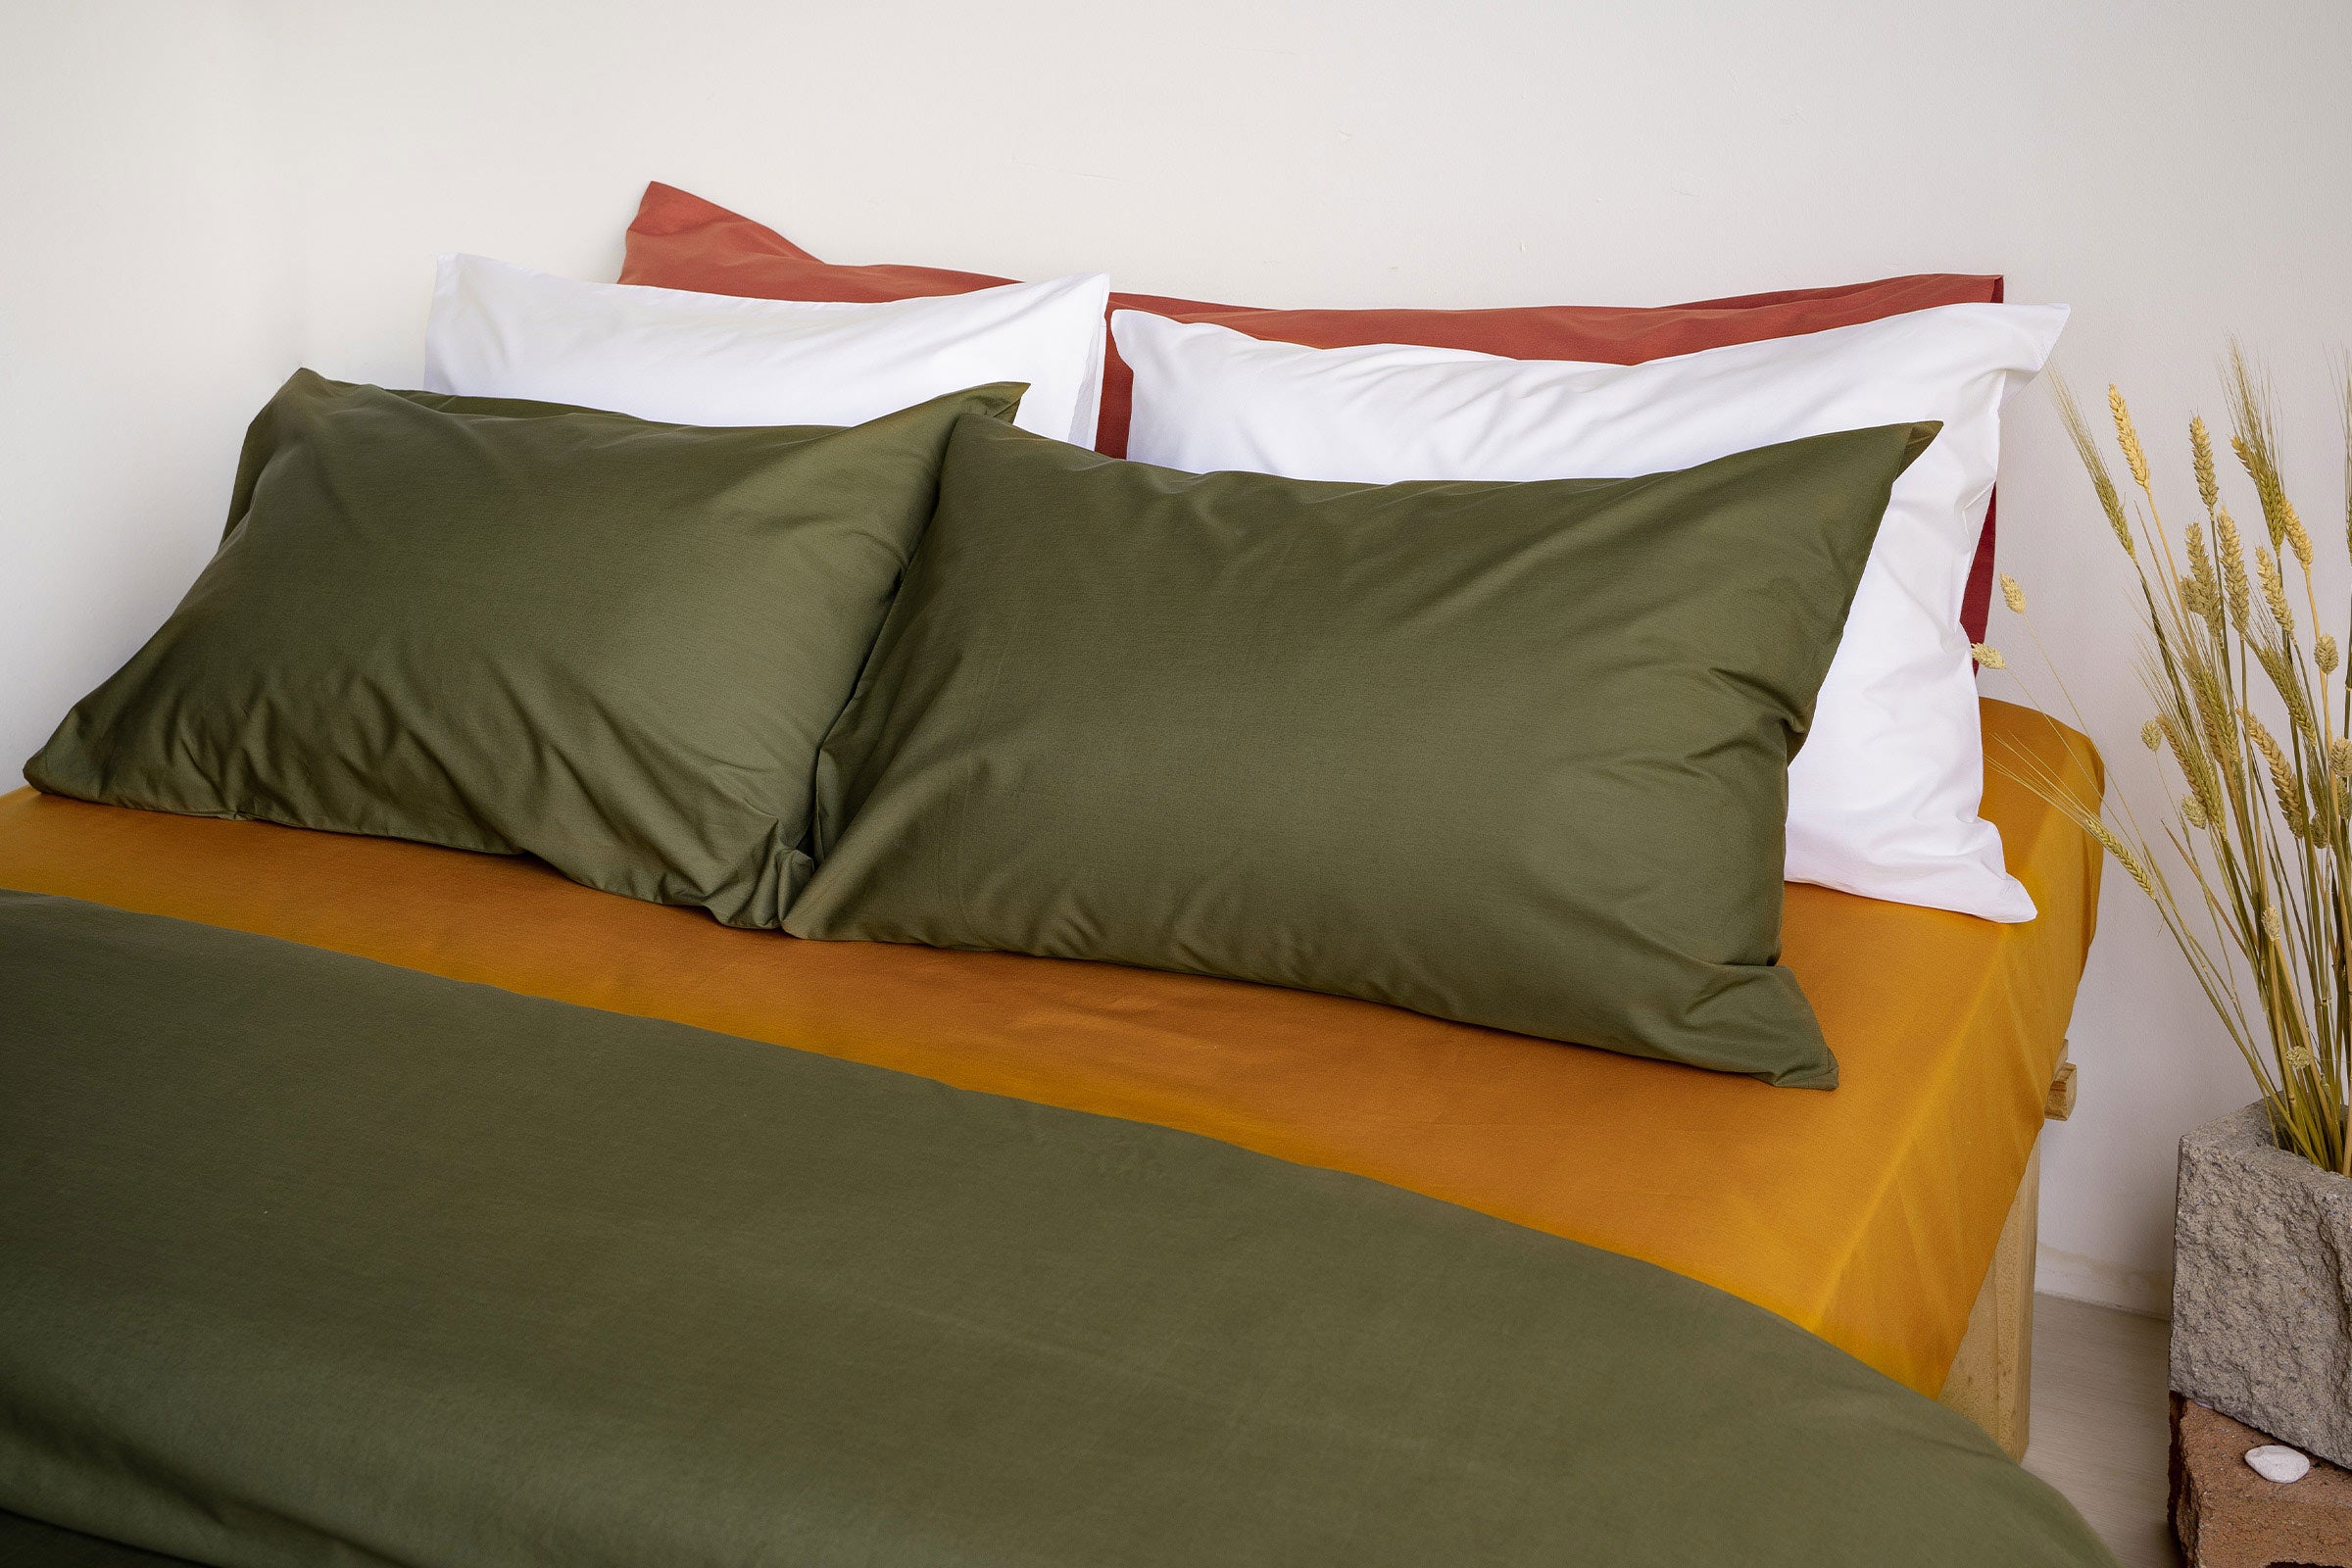 crisp-olive-duvet-cover-pillowcase-pair-mustard-fitted-sheet-white-pillowcase-pair-clay-body-pillow-side-view-by-sojao.jpg